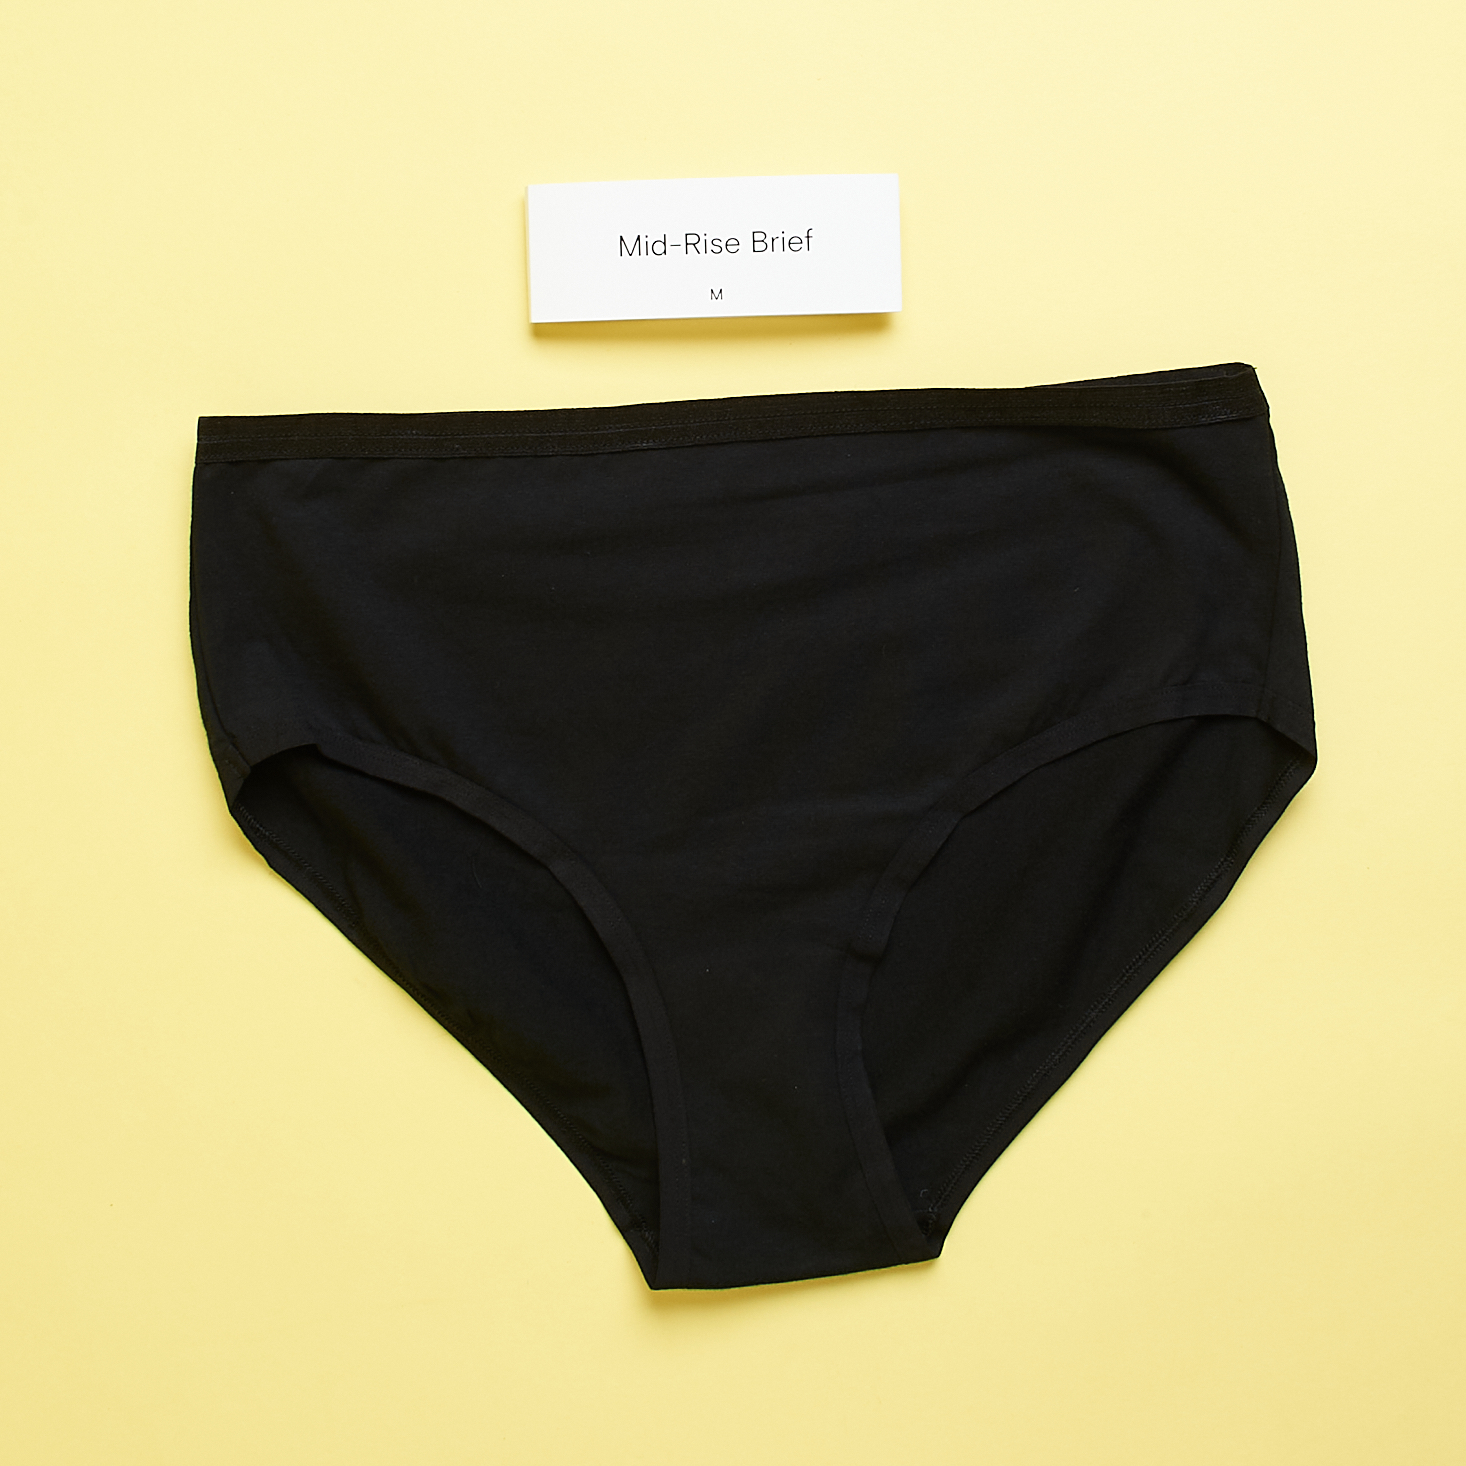 My Knickey Review — Organic Cotton Underwear With a Focus on